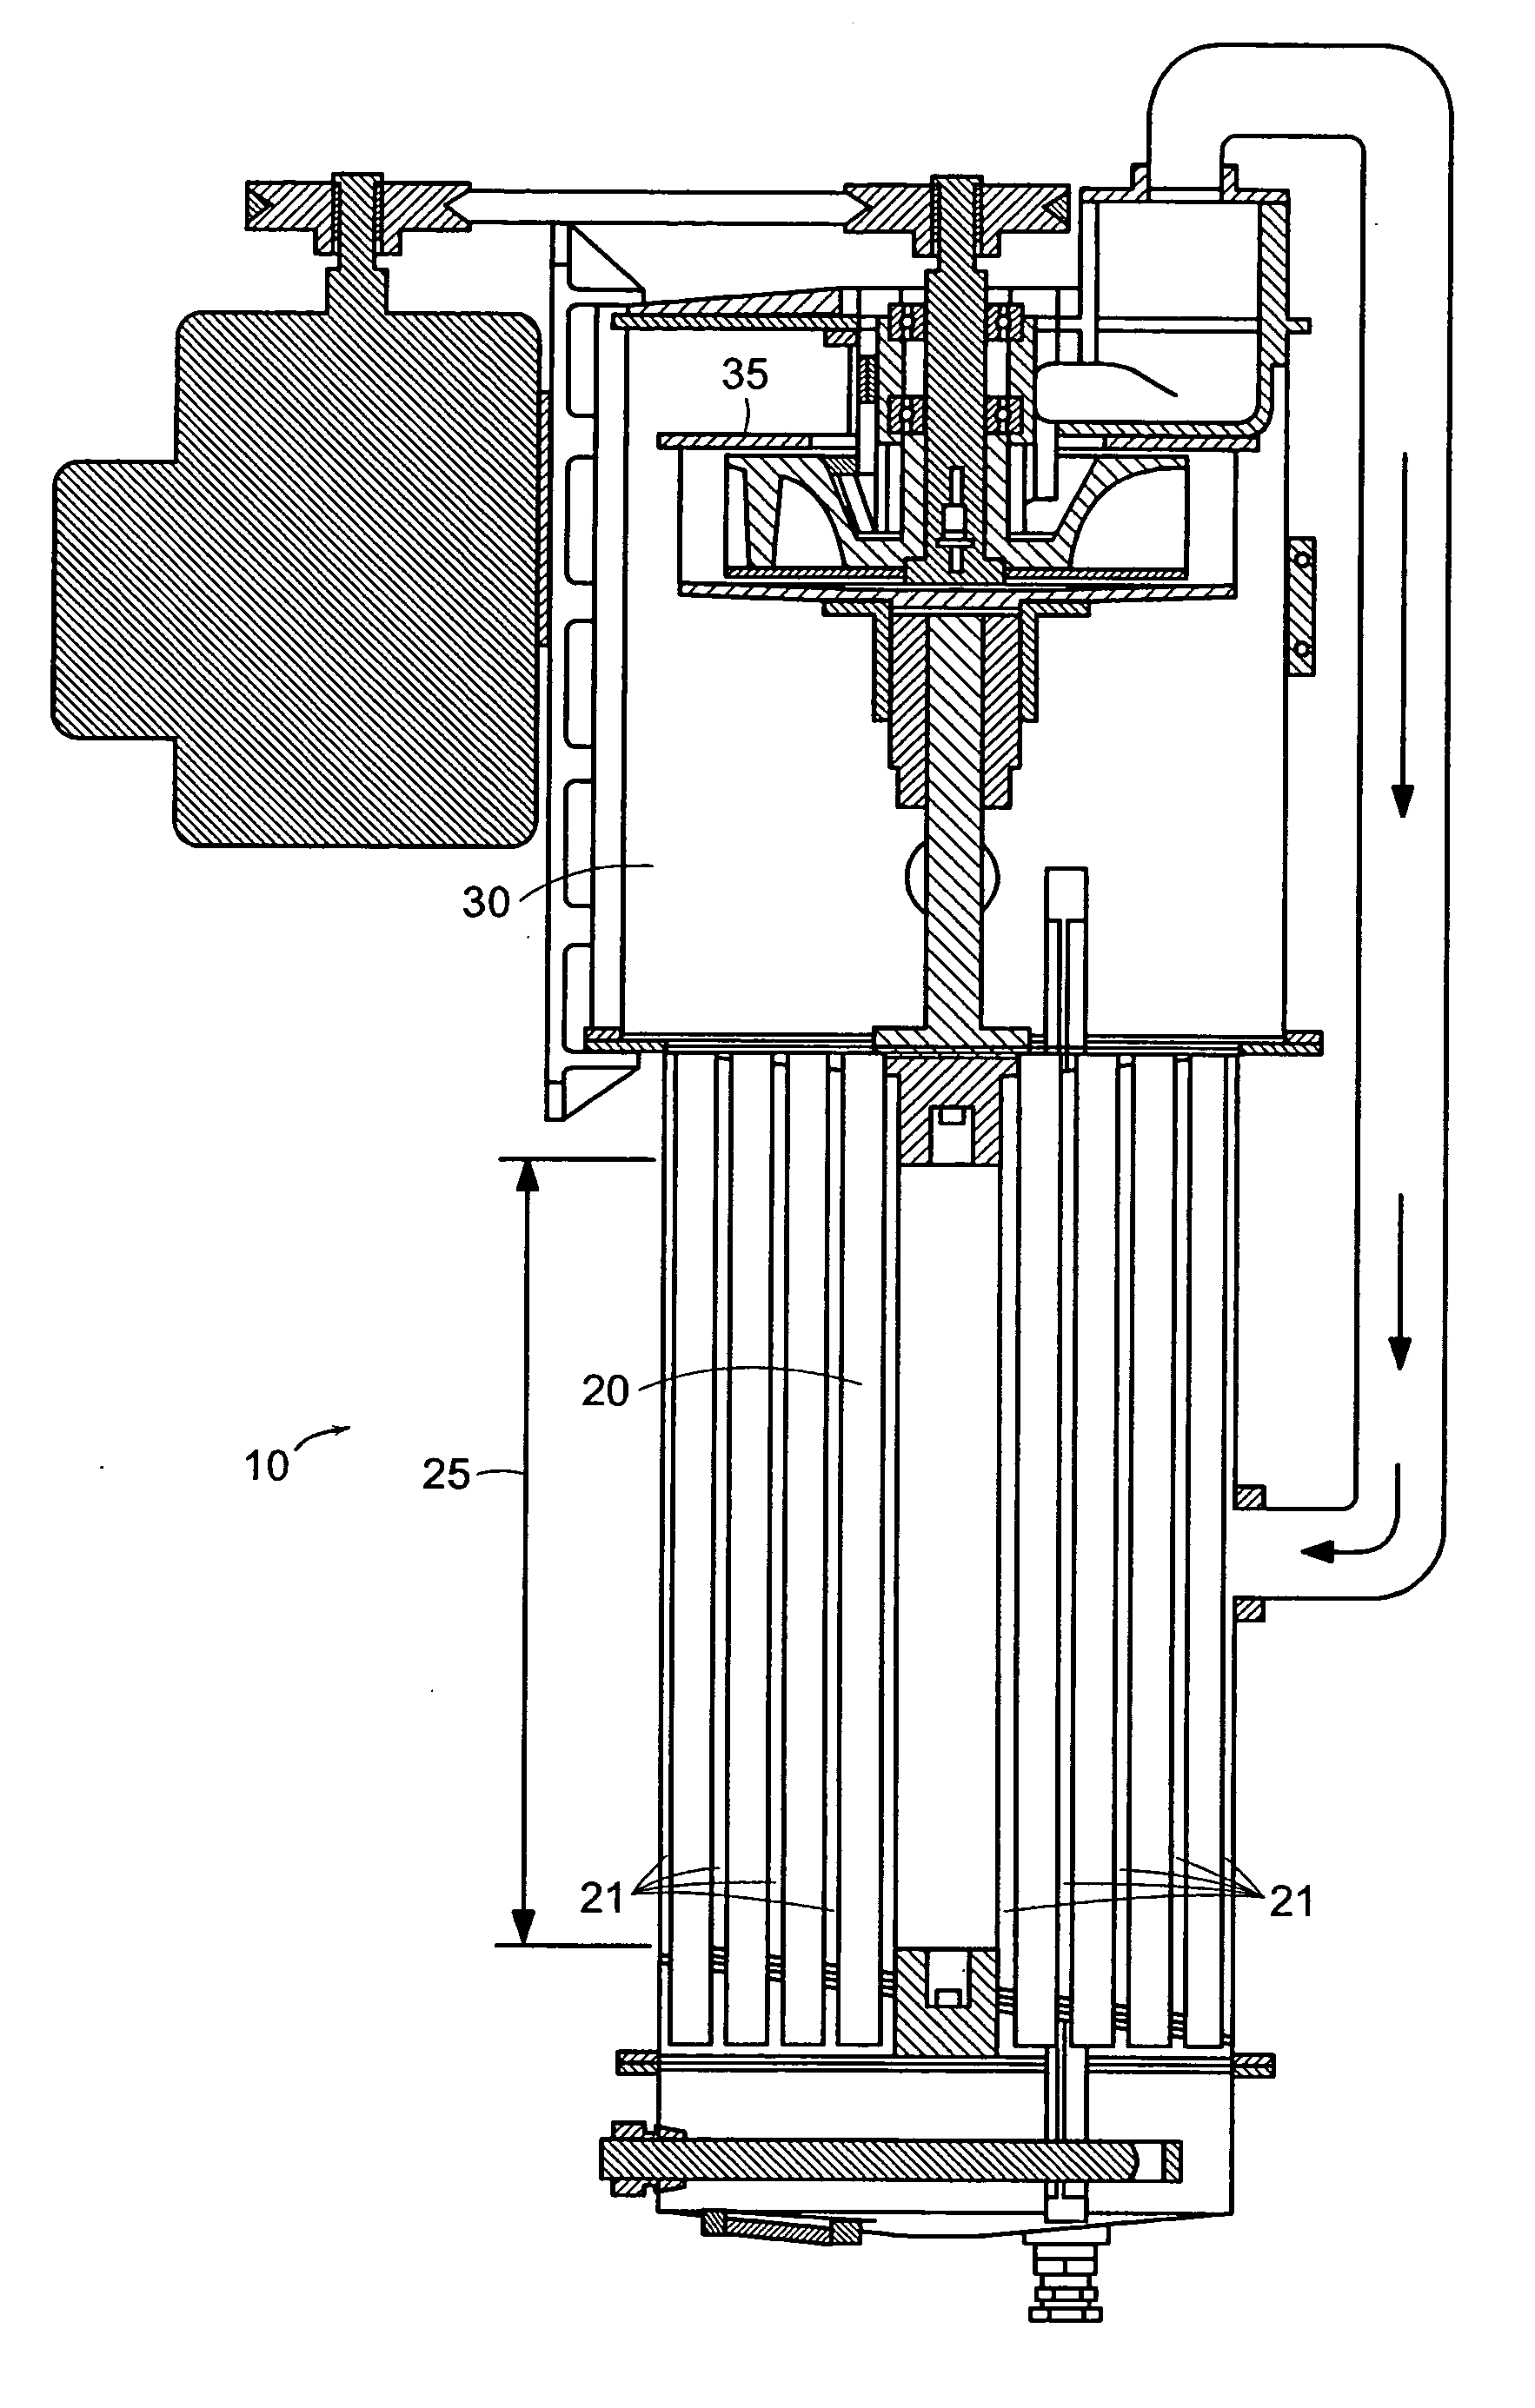 Method and apparatus for phase change enhancement